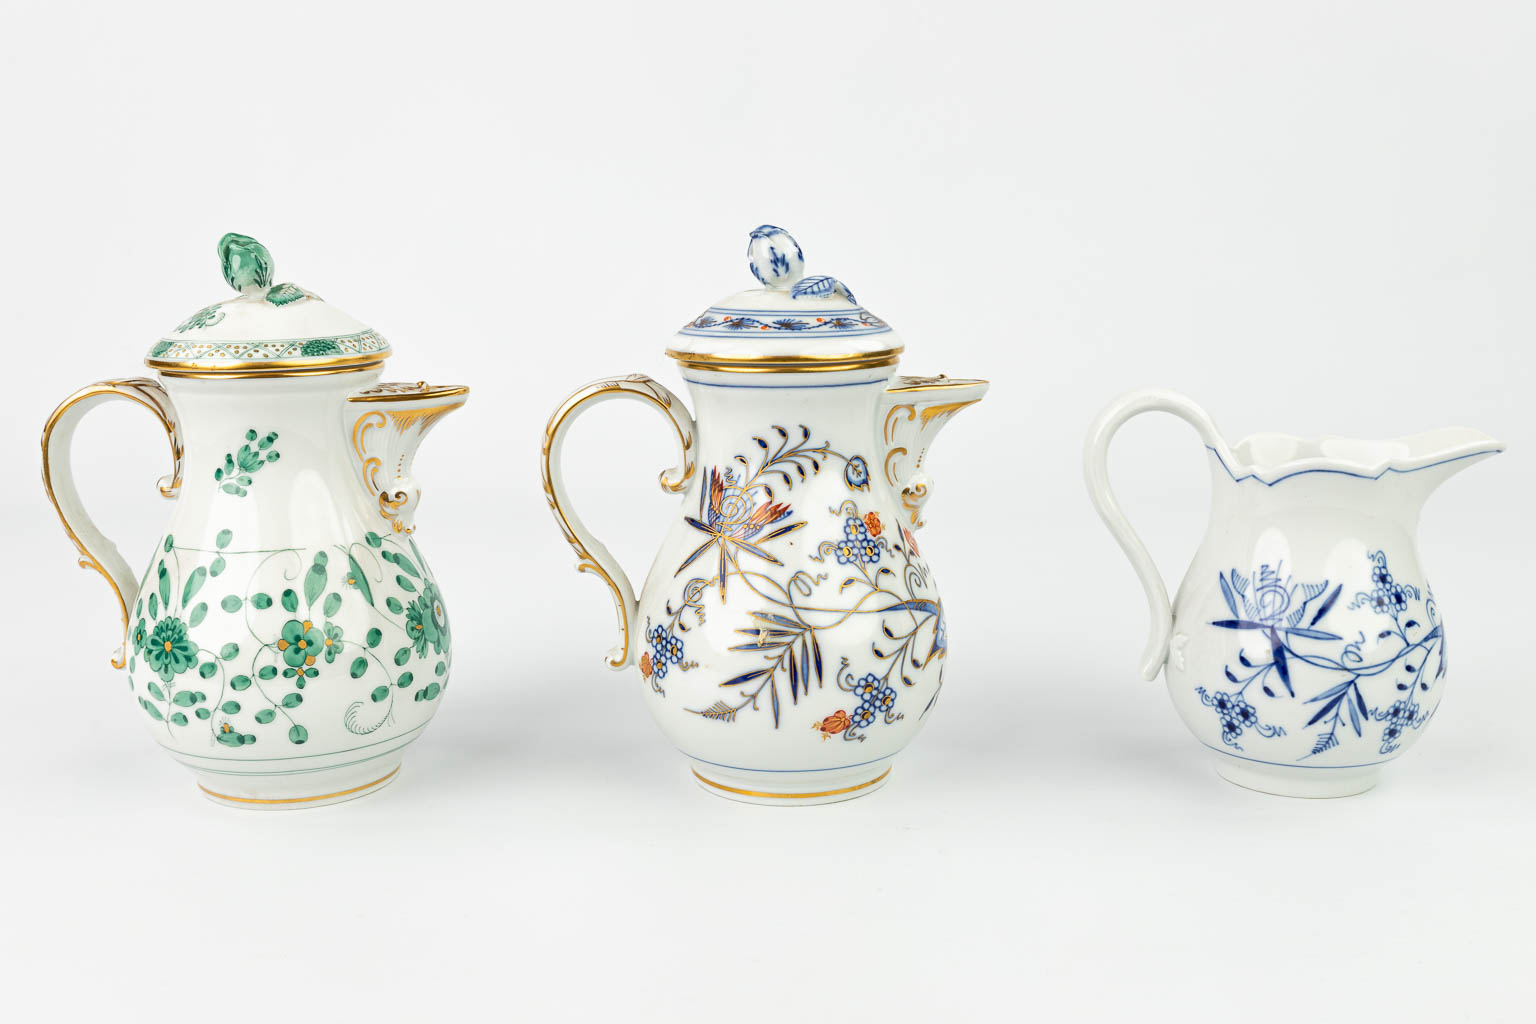 A collection of 2 coffee pots and a milk jug made by Meissen porcelain, 20th century. (H:17cm)